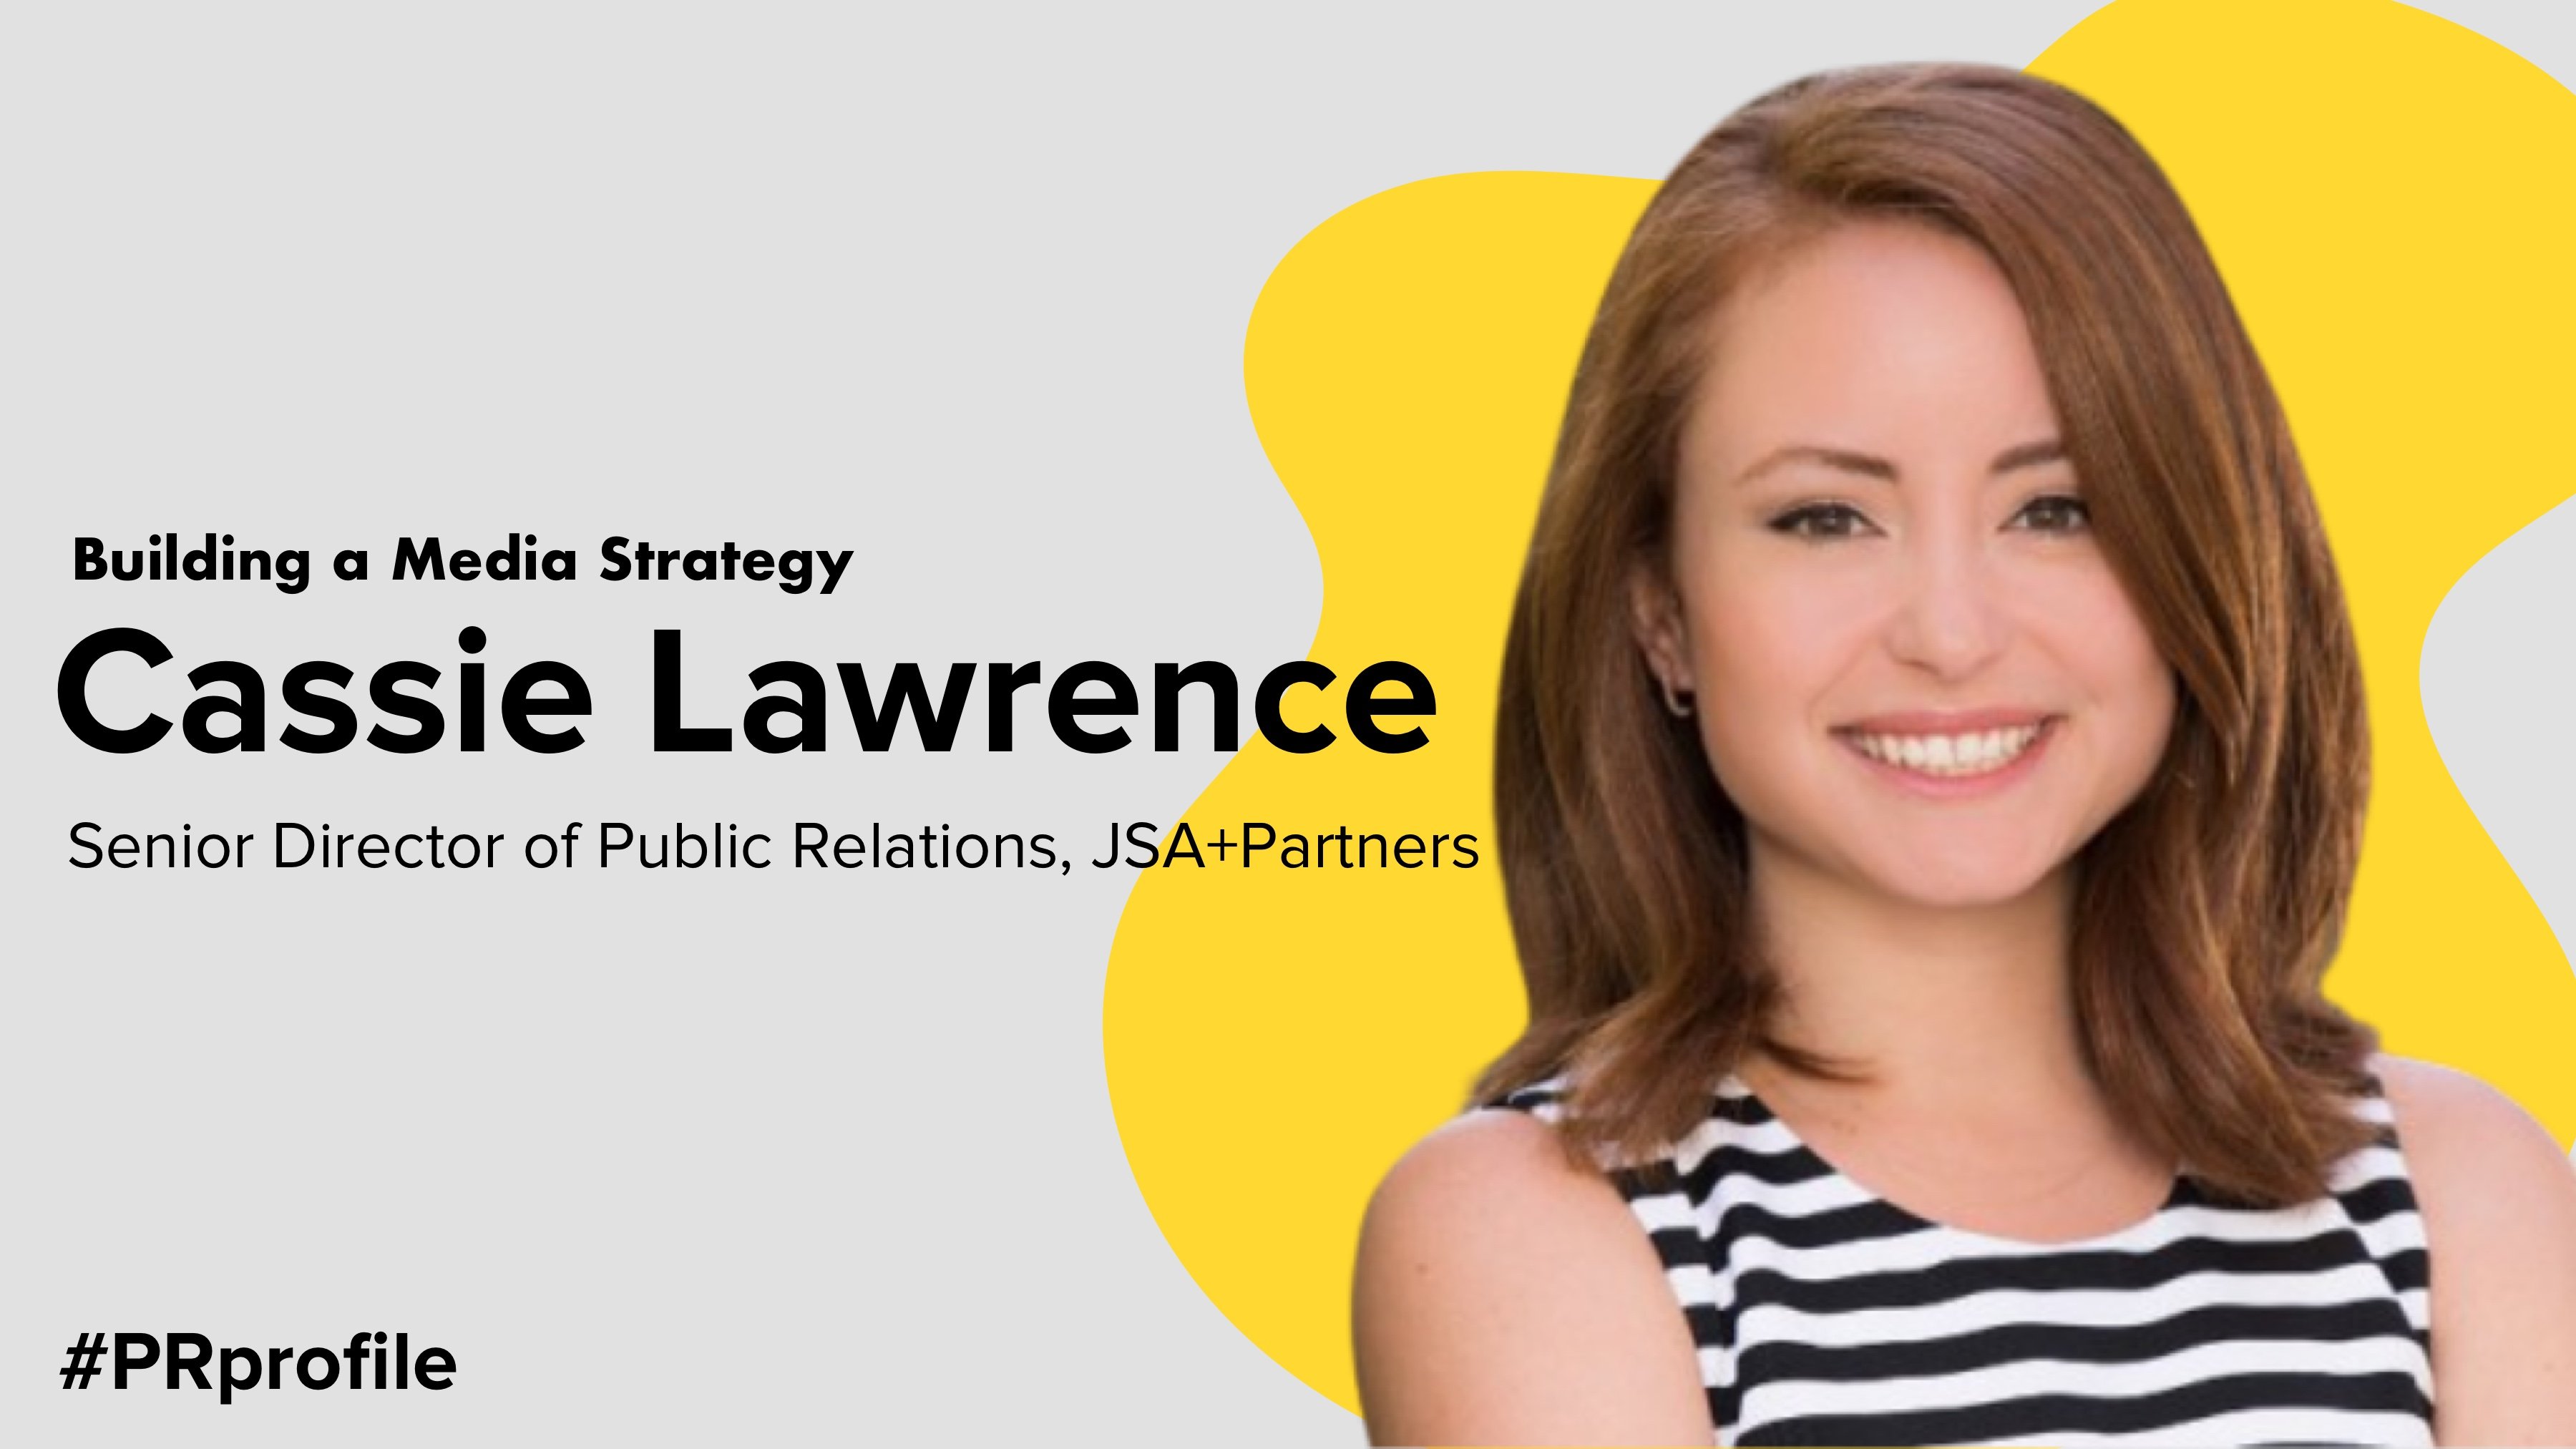 Building a Media Strategy with Cassie Lawrence, JSA+Partners